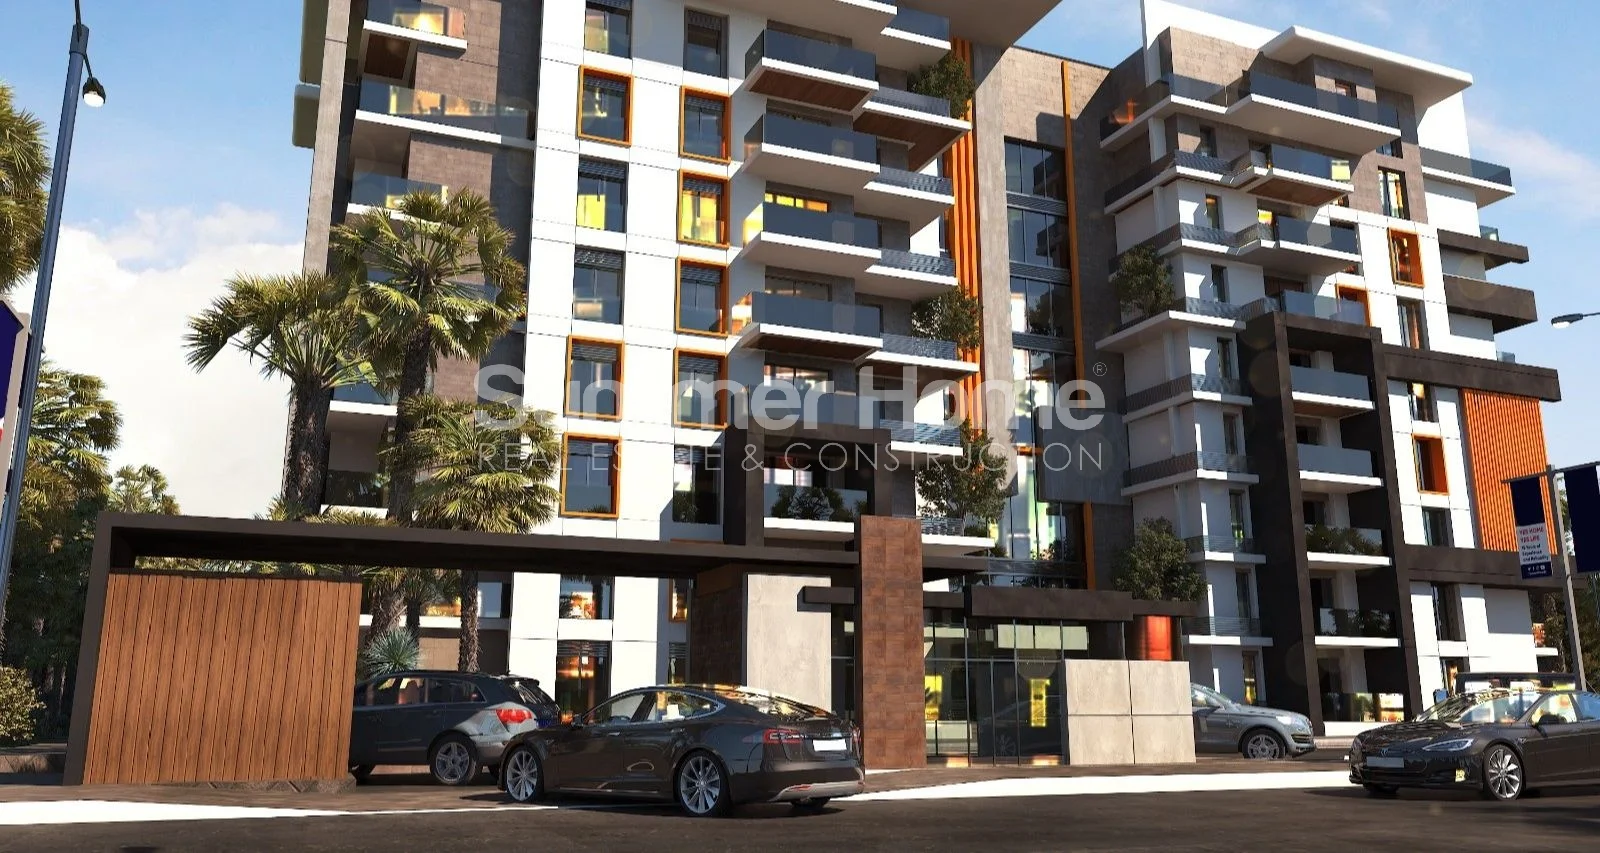 Modern complex in upcoming district of Altintas, Antalya General - 17